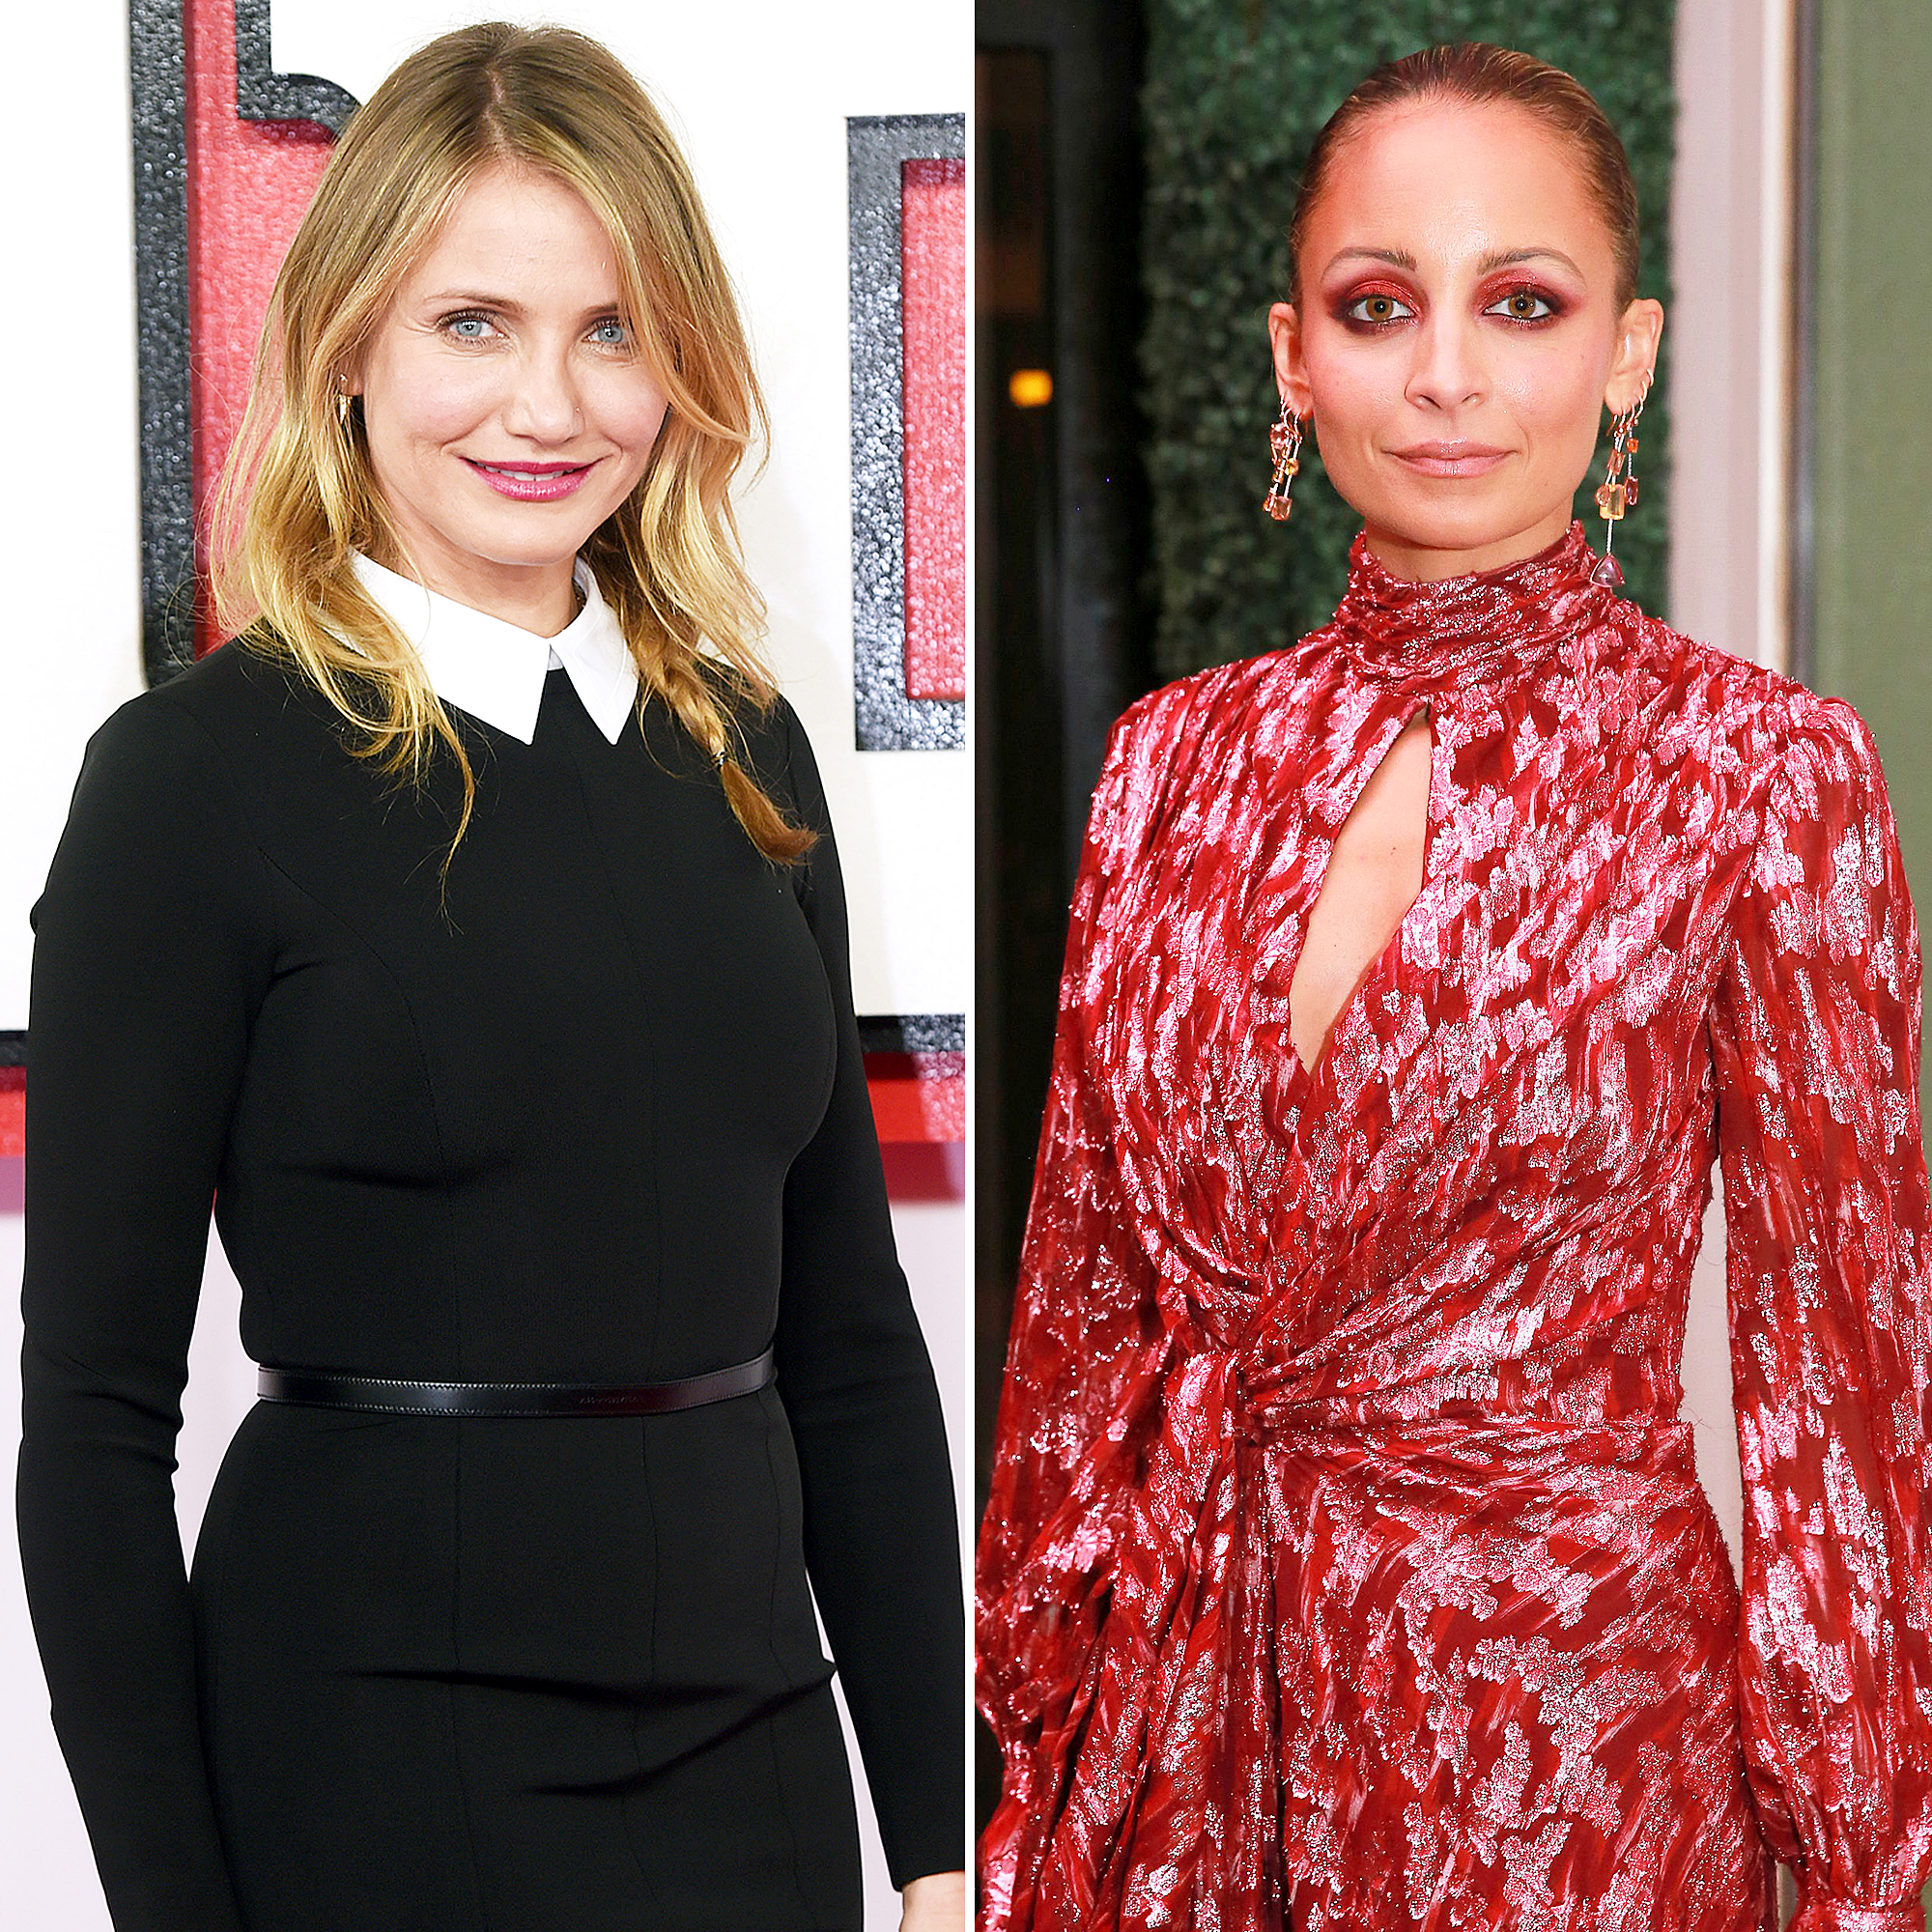 Cameron Diaz Is Blown Away by Nicole Richie Being Her Sister-in-Law